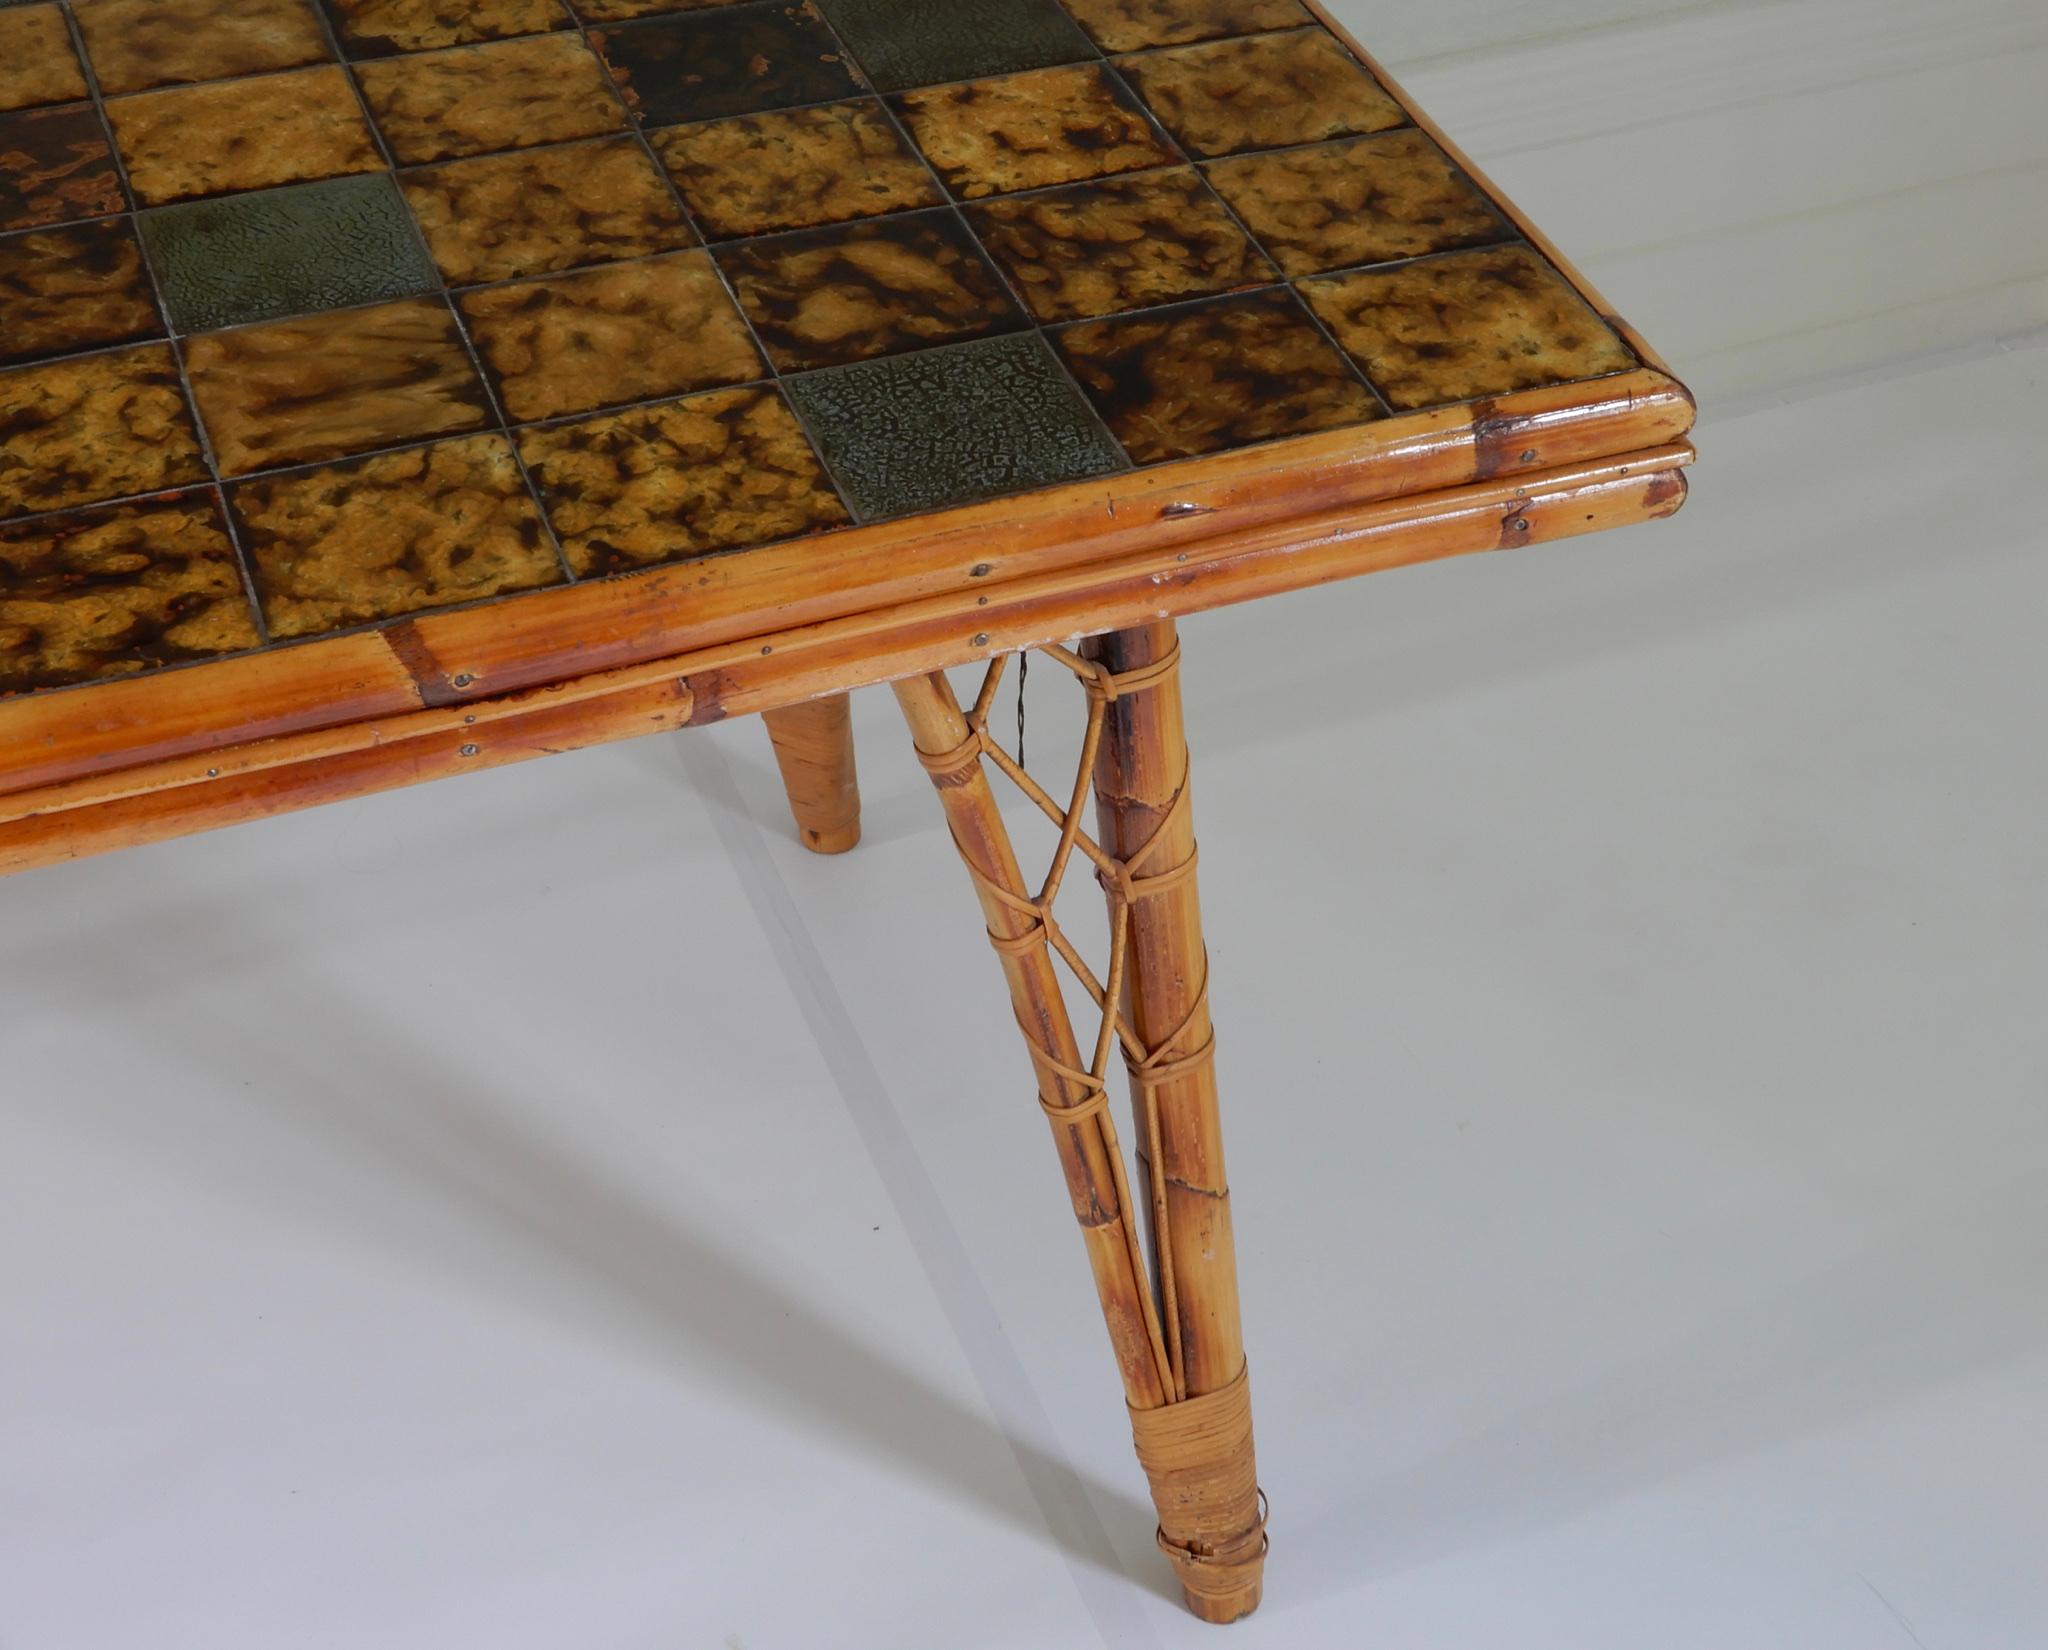 ceramic tile top dining table